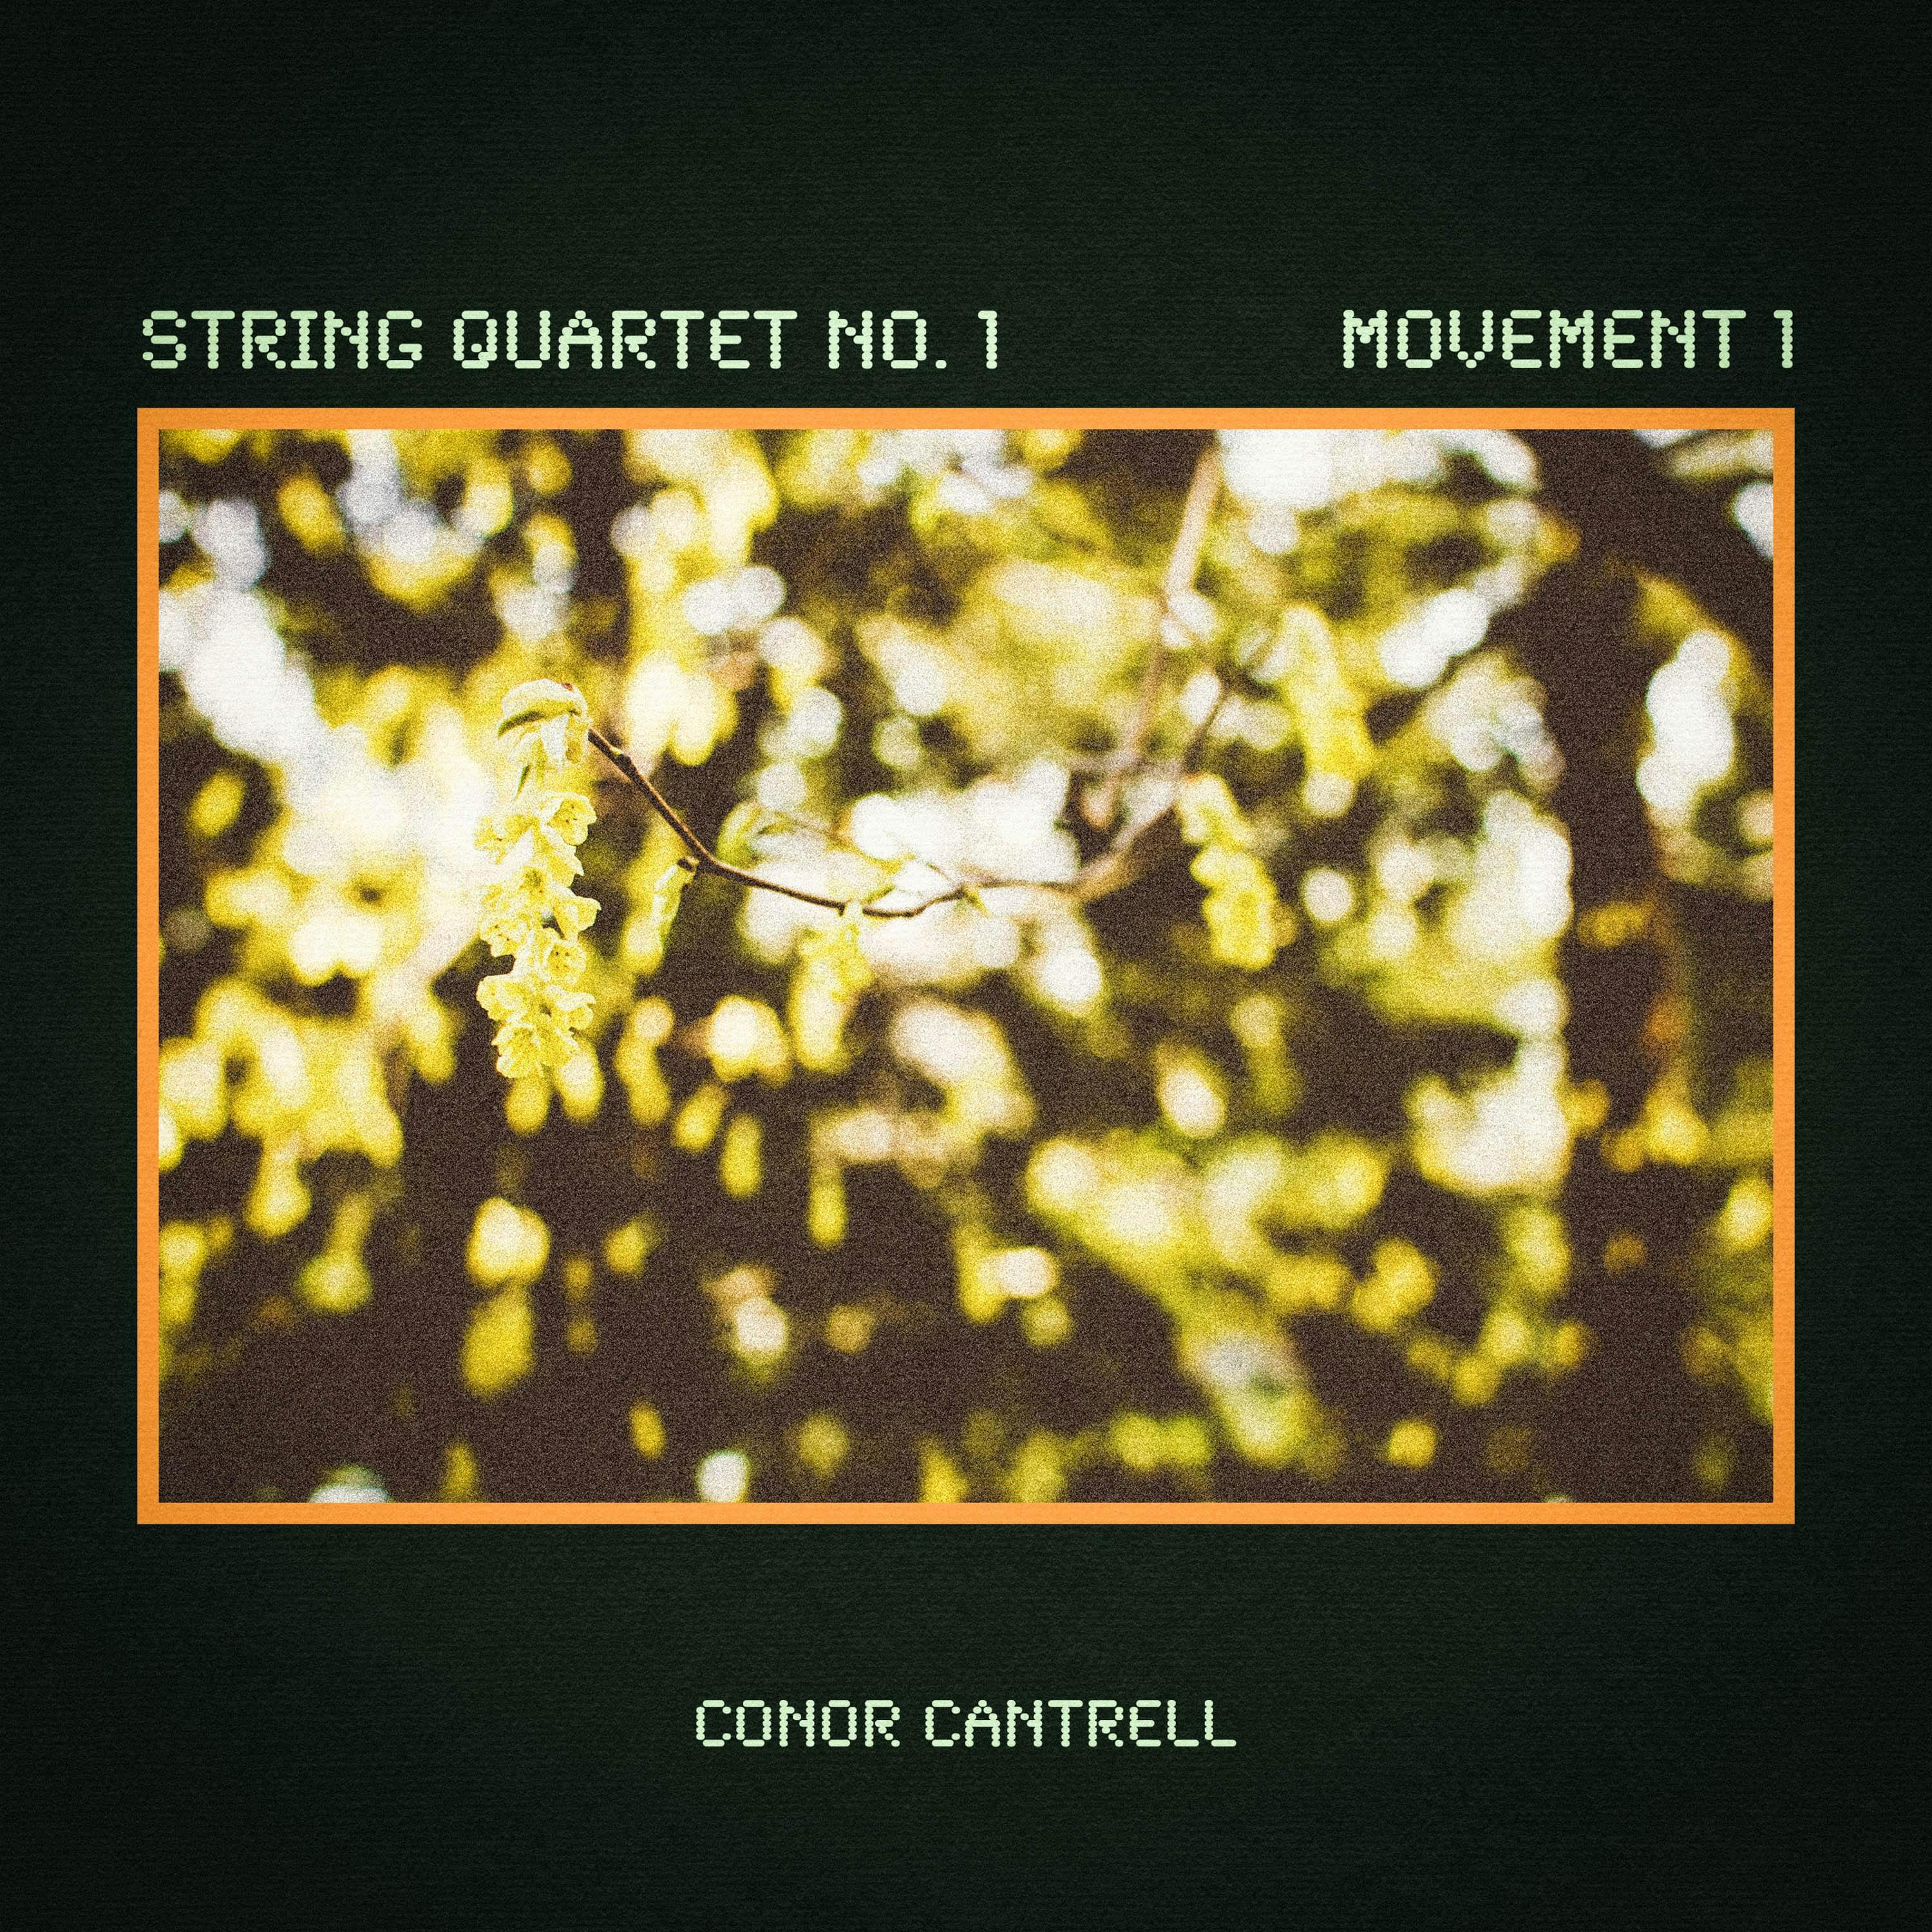 Cover art for Conor Cantrell's song: String Quartet No. 1, Movement 1